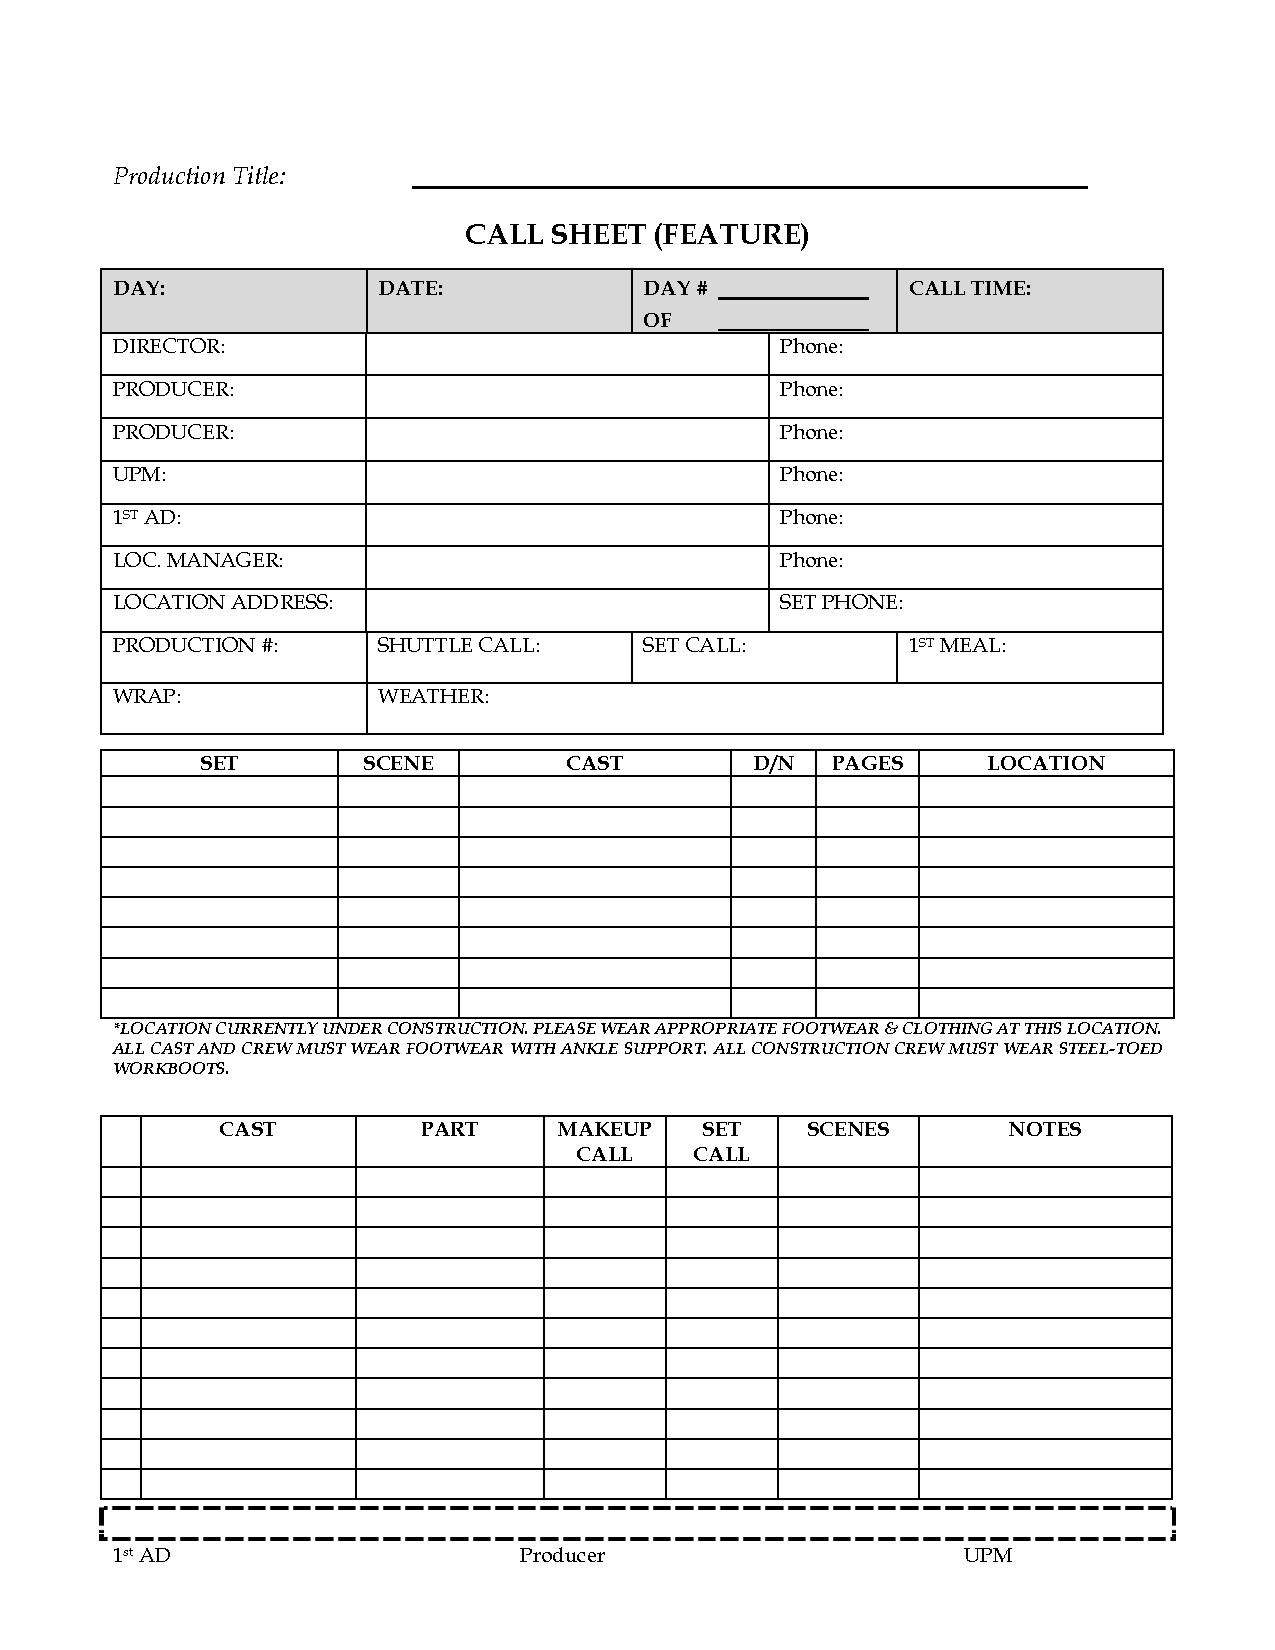 Awesome Call Sheet (Feature) Template Sample For Film In Blank Call Sheet Template